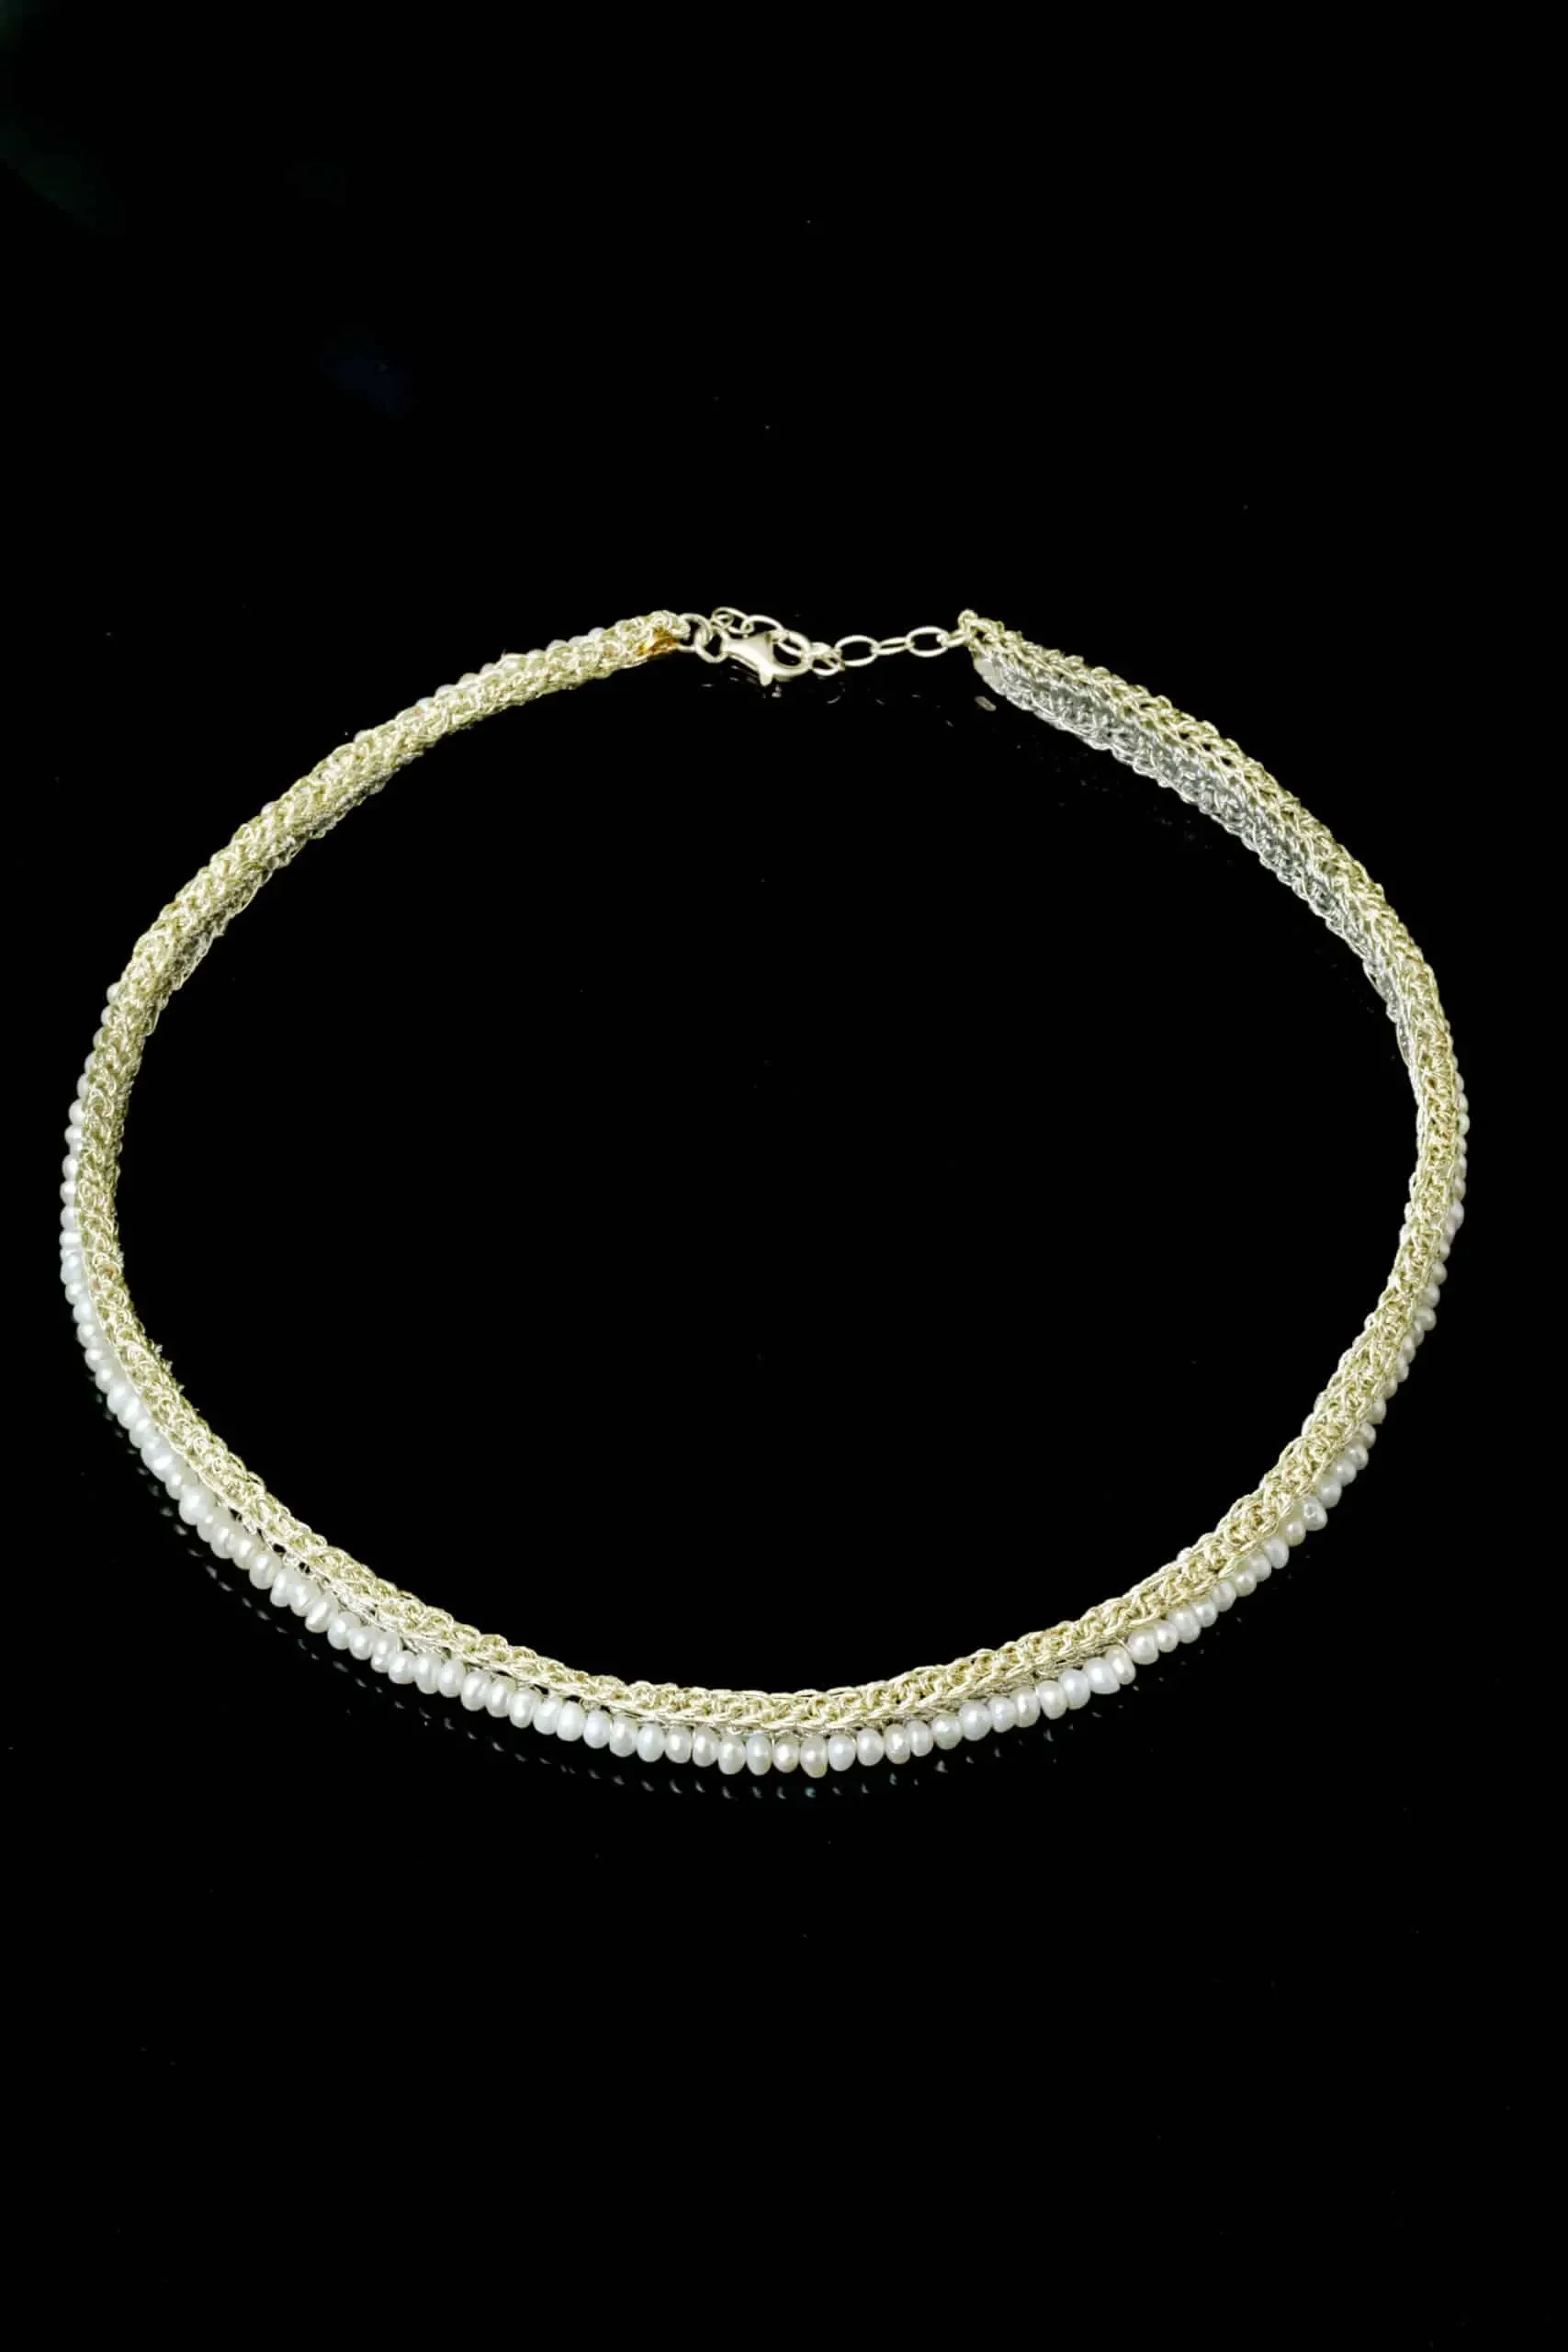 Handmade Jewellery | Crochet knit silver necklace with and pearls gallery 1